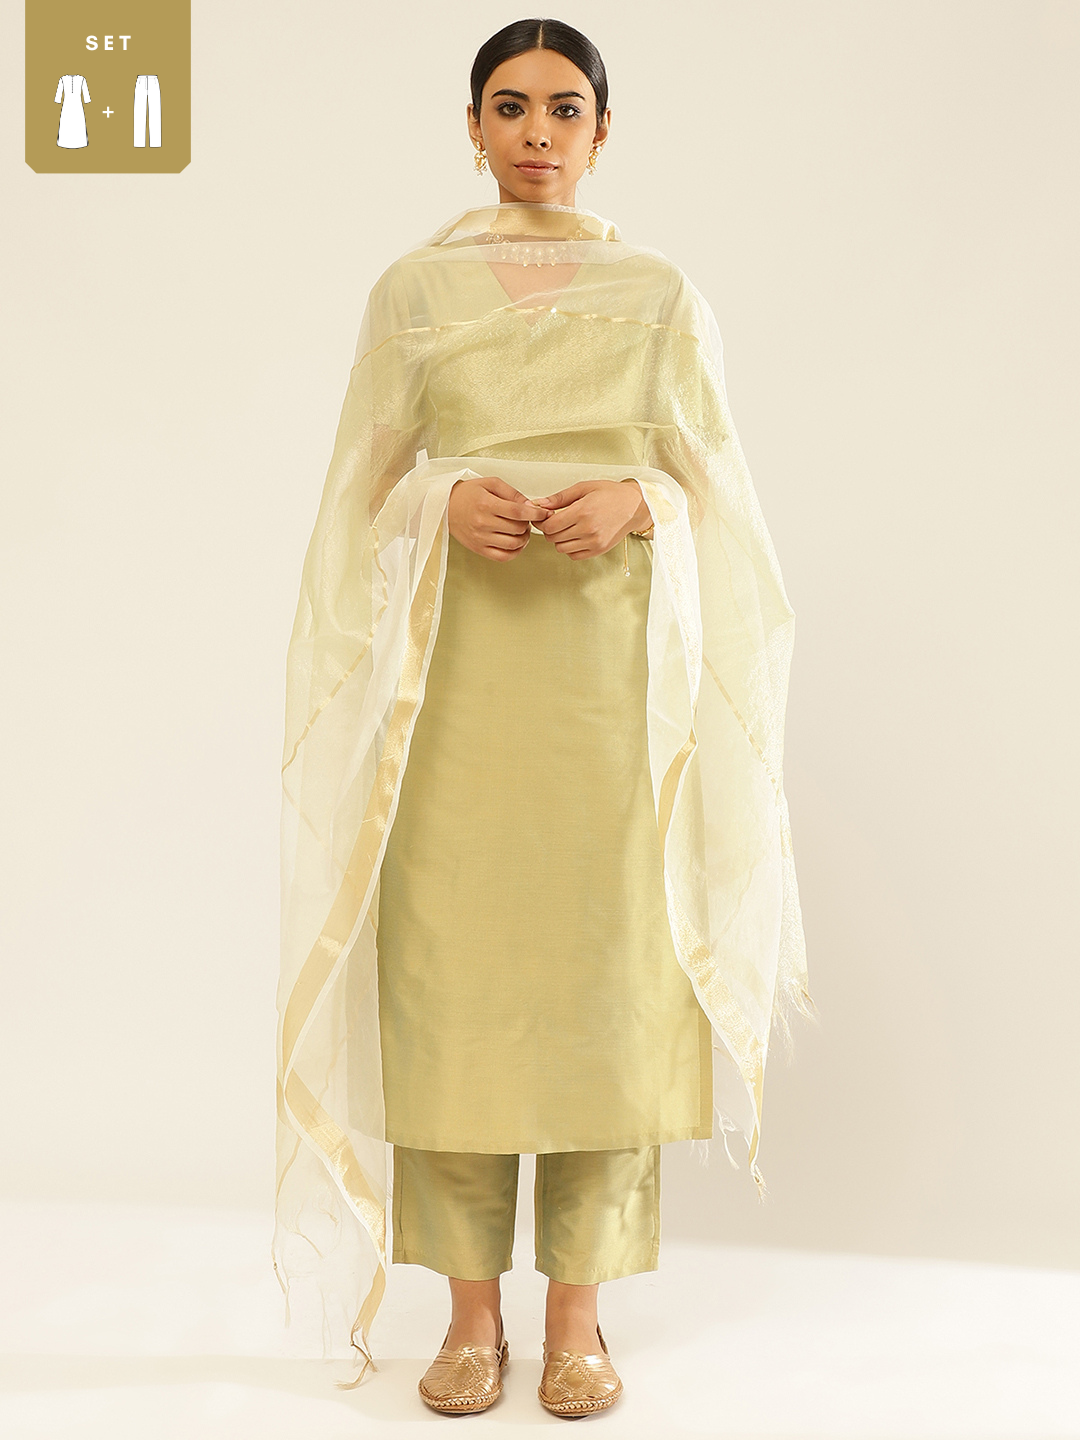 Solid color straight kurta with bell sleeves accompanied with straight pants and Dupatta.